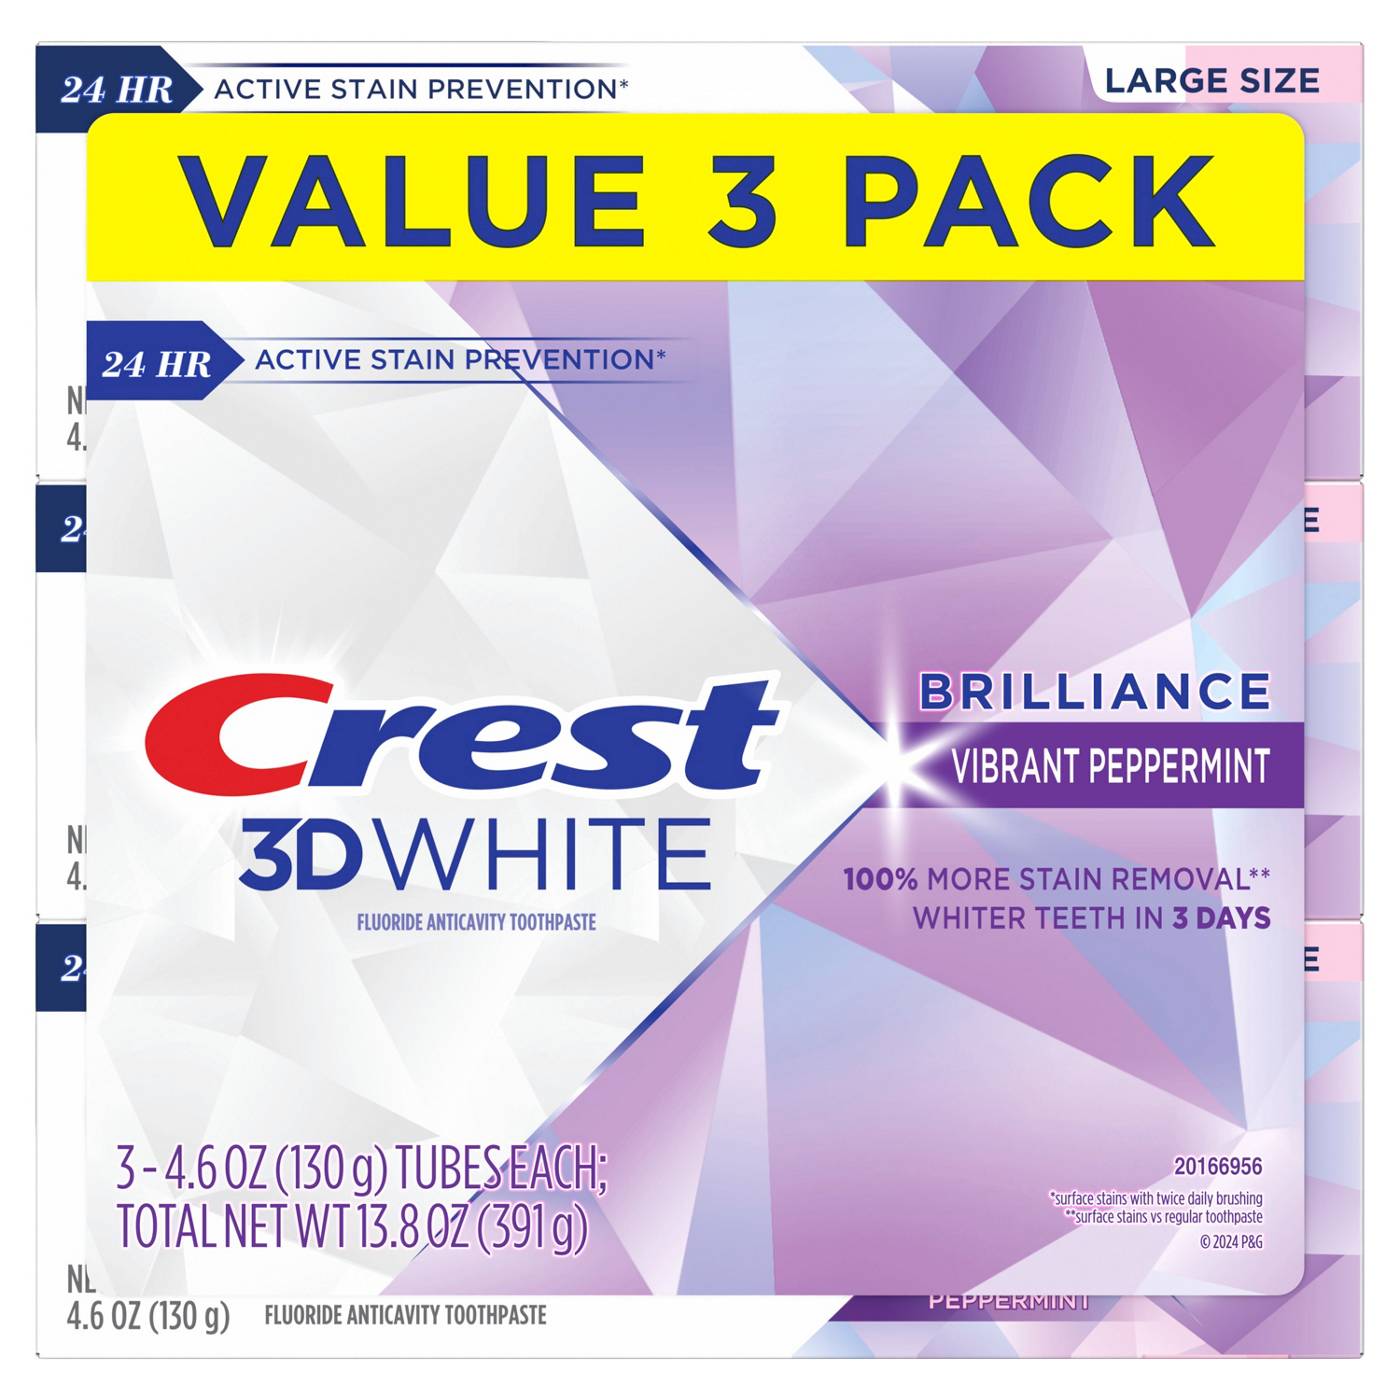 Crest 3D White Toothpaste Brilliance - Peppermint; image 1 of 8